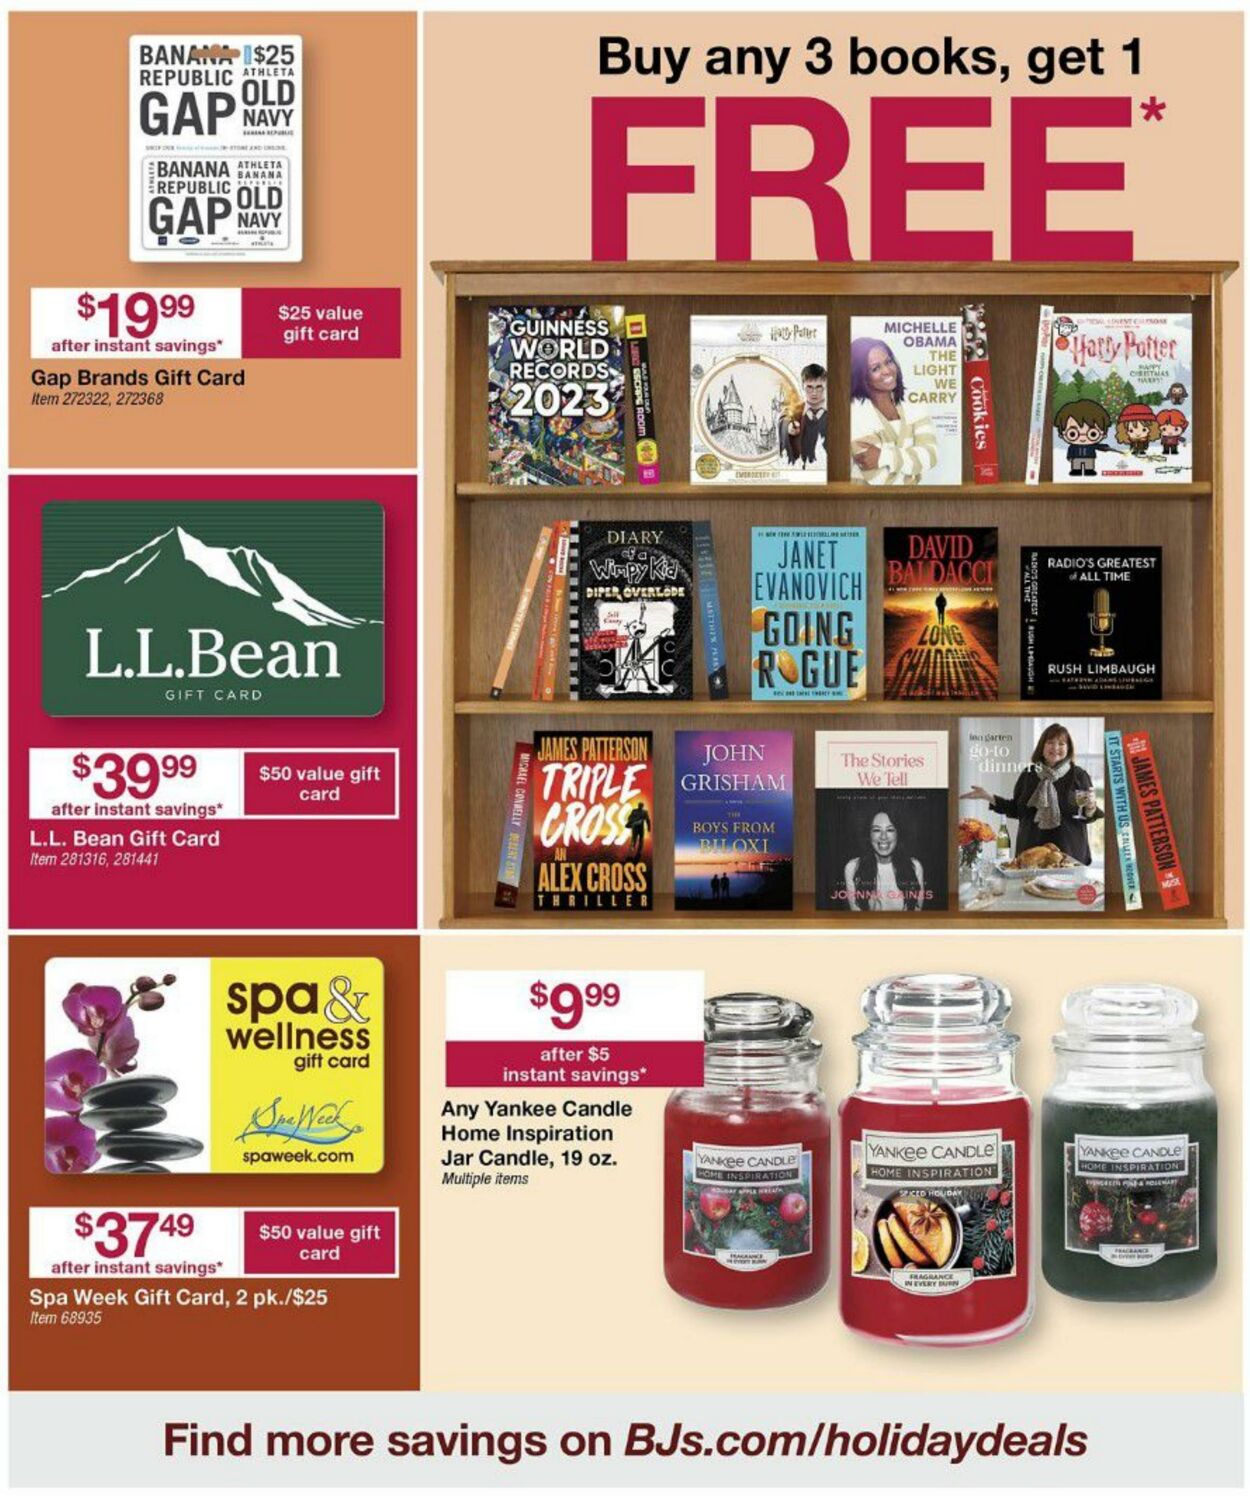 Weekly ad BJ's 11/15/2022 - 11/28/2022